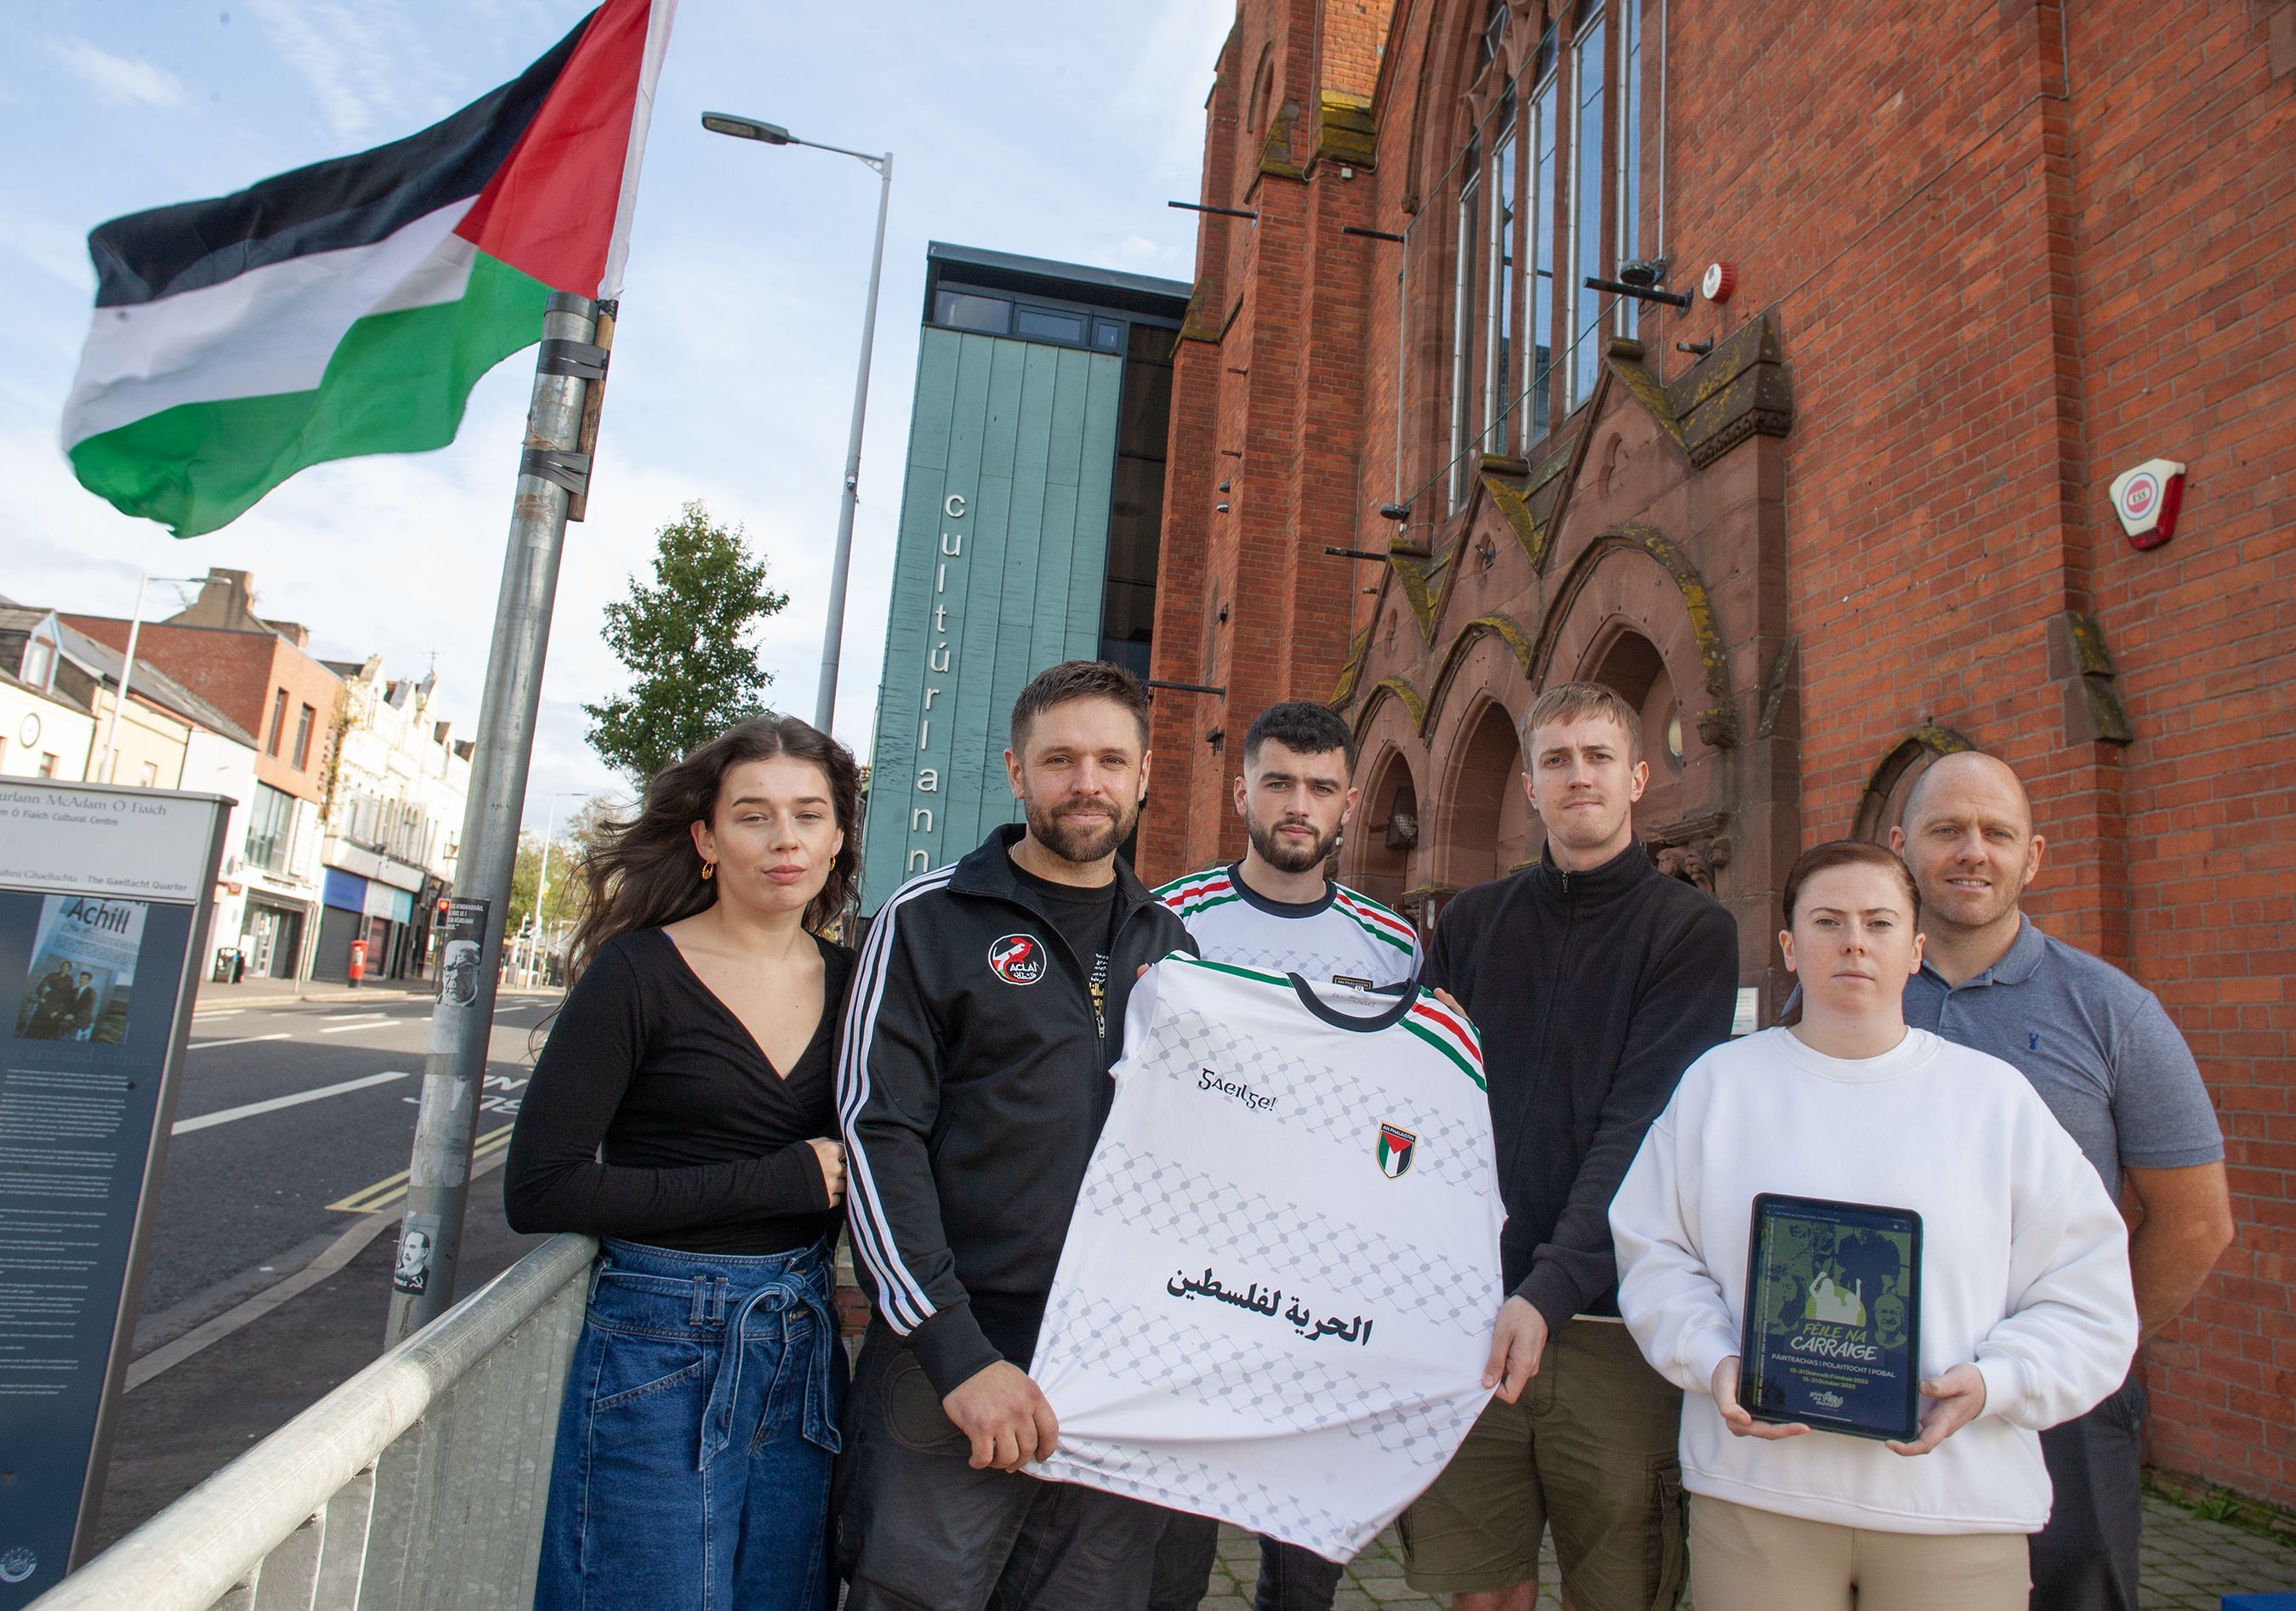 LE CHÉILE: Féile na Carraige organisers including Ainle, Laochra, Eoghan and Feargal said Saturday will be a night of solidarity with Palestinians